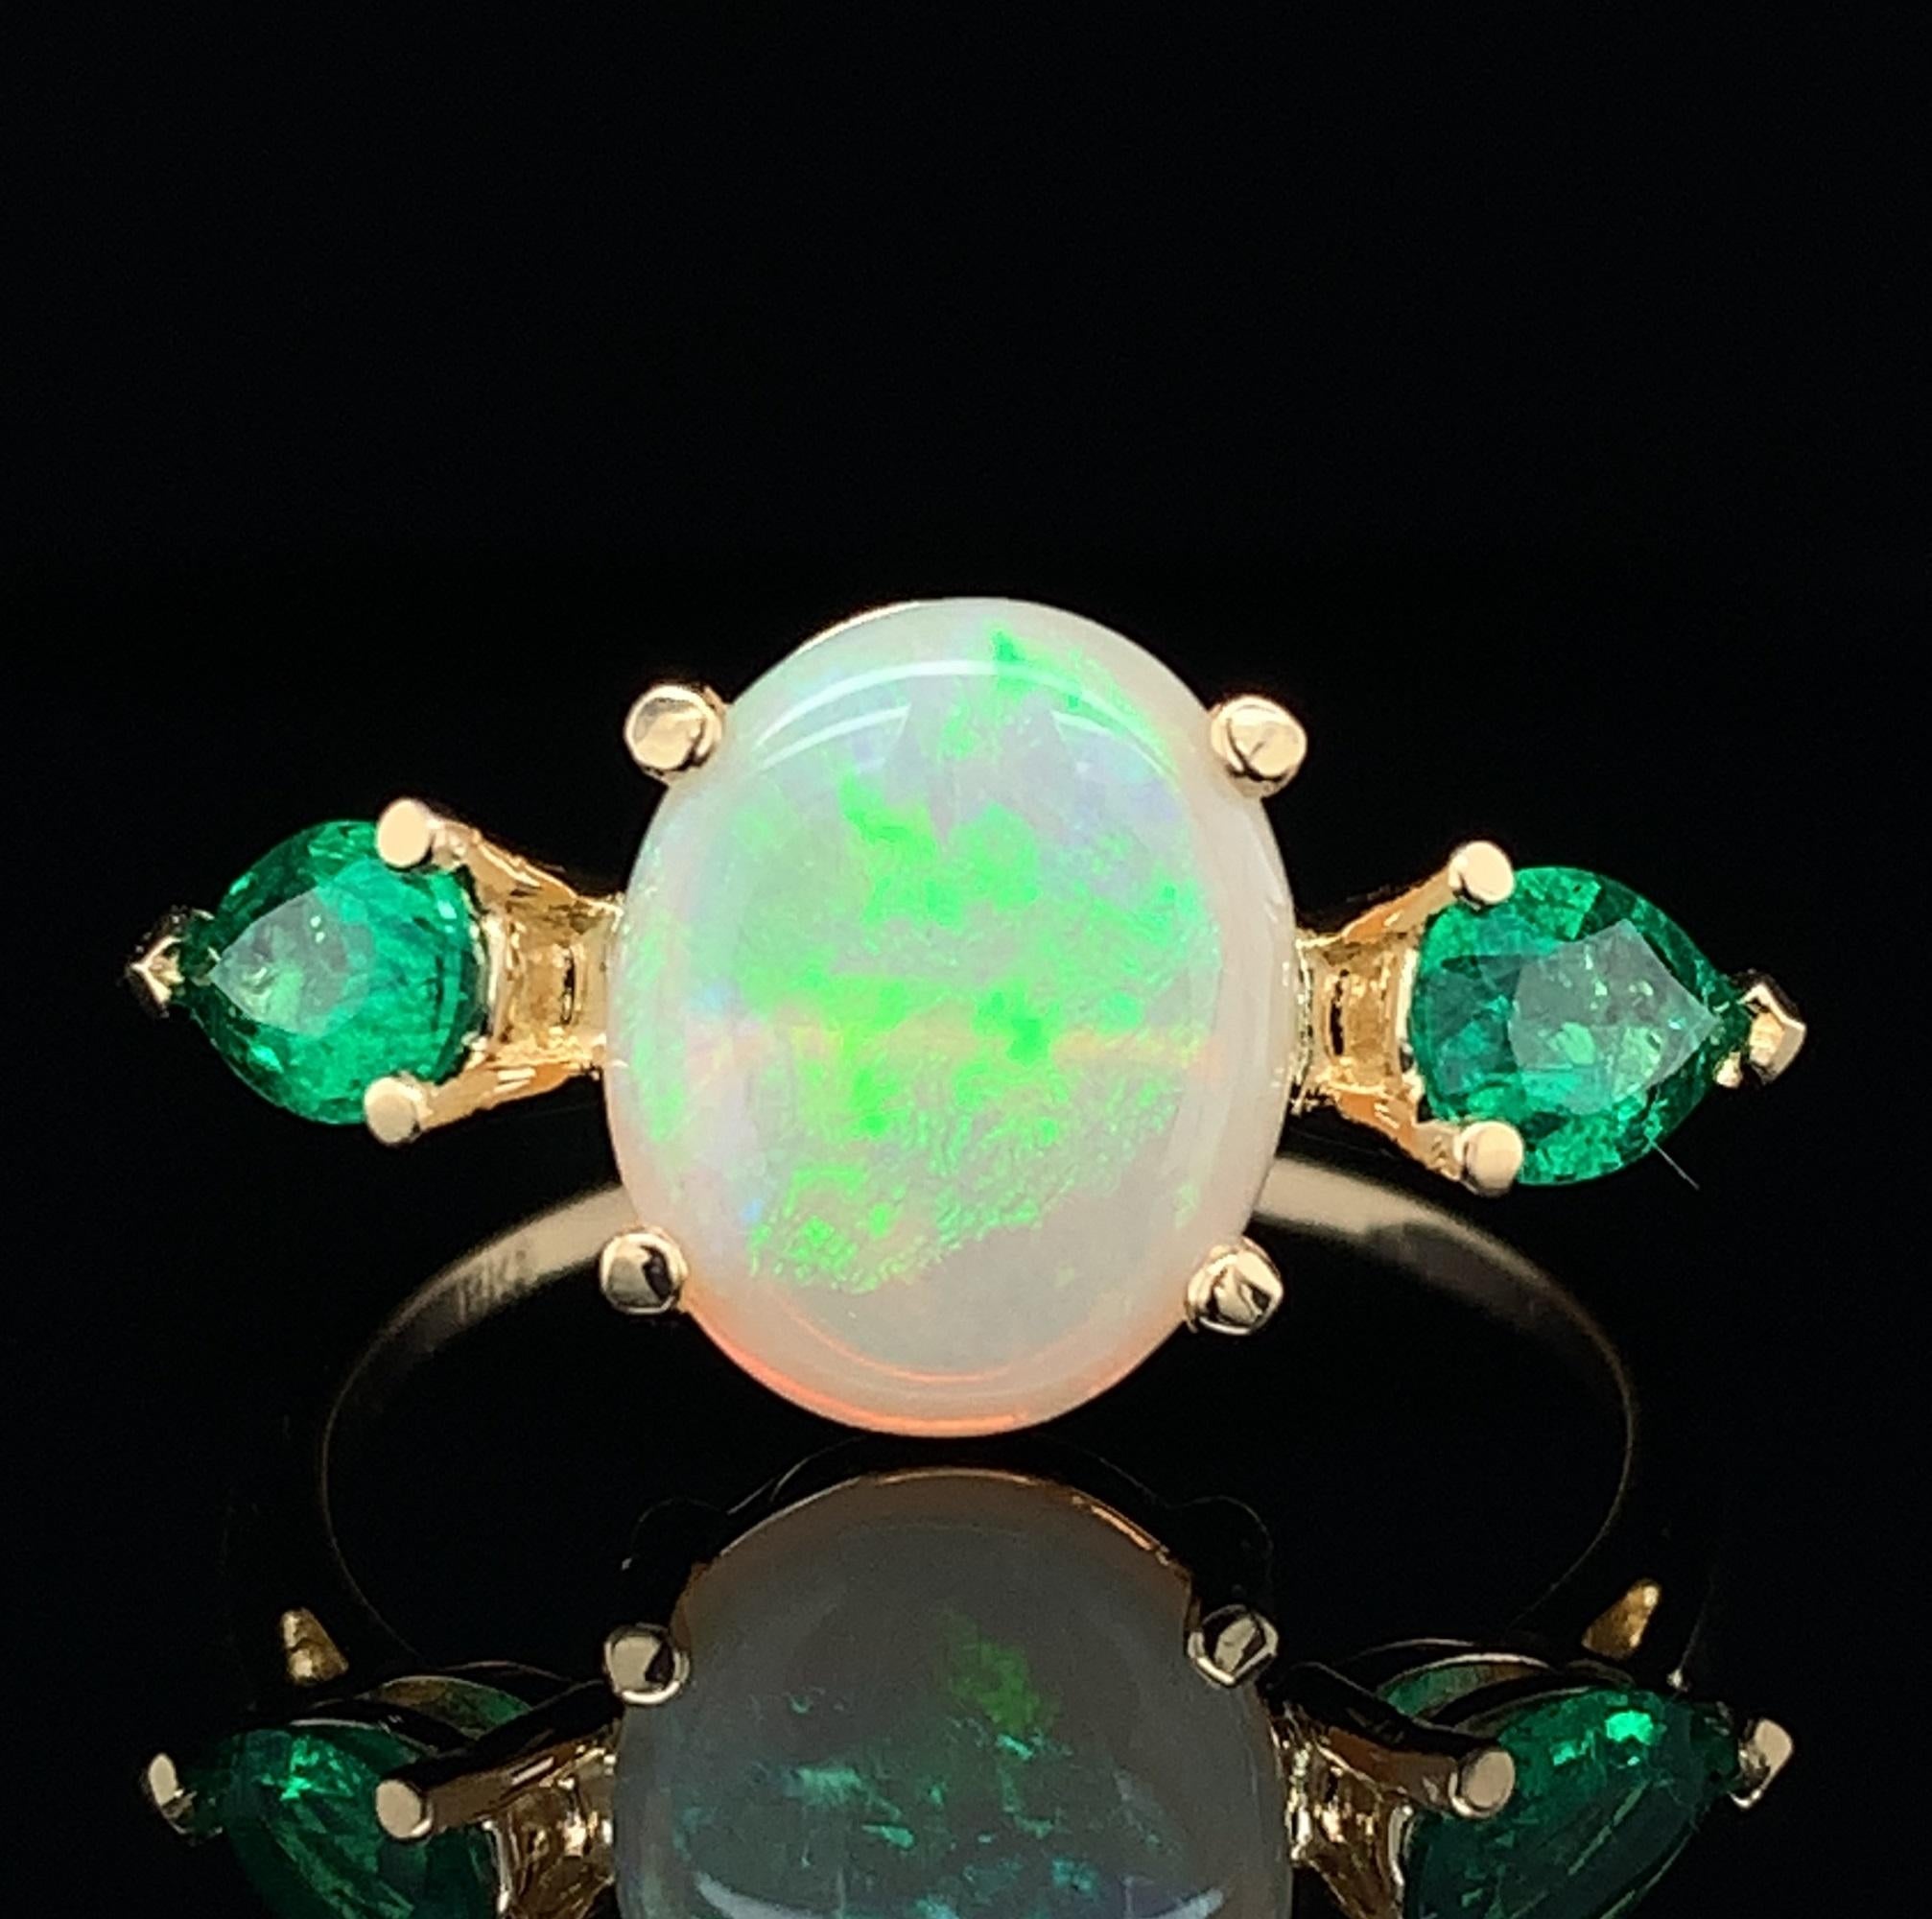 18K yellow gold ring featuring a 1.76 carat  opal with emeralds. The opal has lively play of color on a white background with green and yellow.  The oval opal measures about 11mm x 9mm. There are 2 pear shaped genuine earth mined emeralds weighing